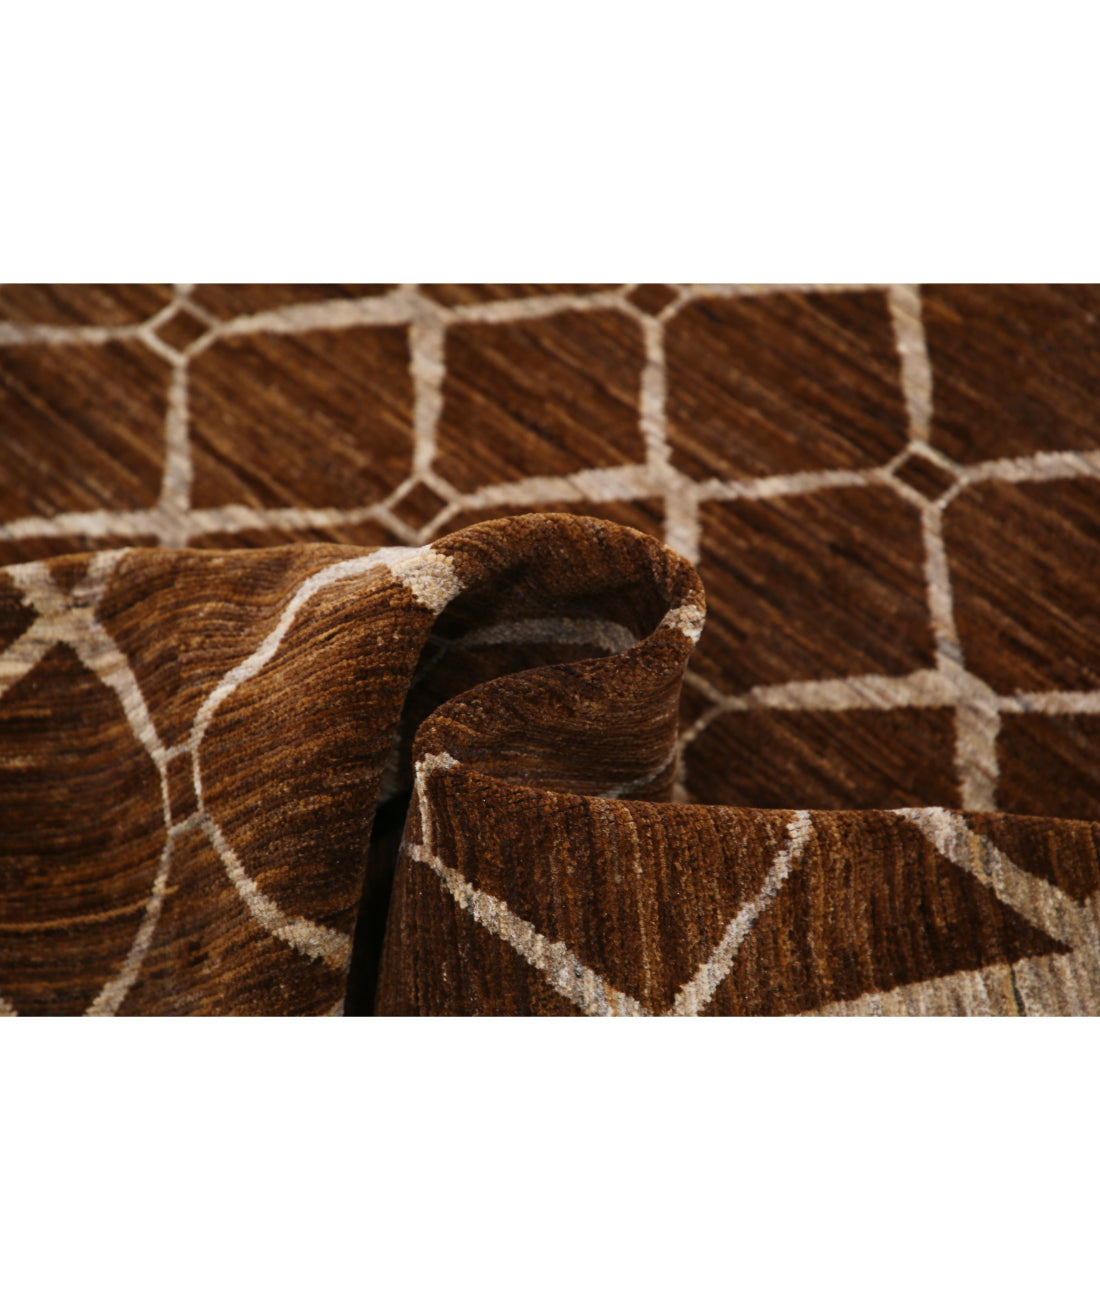 Hand Knotted Modcar Wool Rug - 4'0'' x 5'5'' 4'0'' x 5'5'' (120 X 163) / Brown / Brown